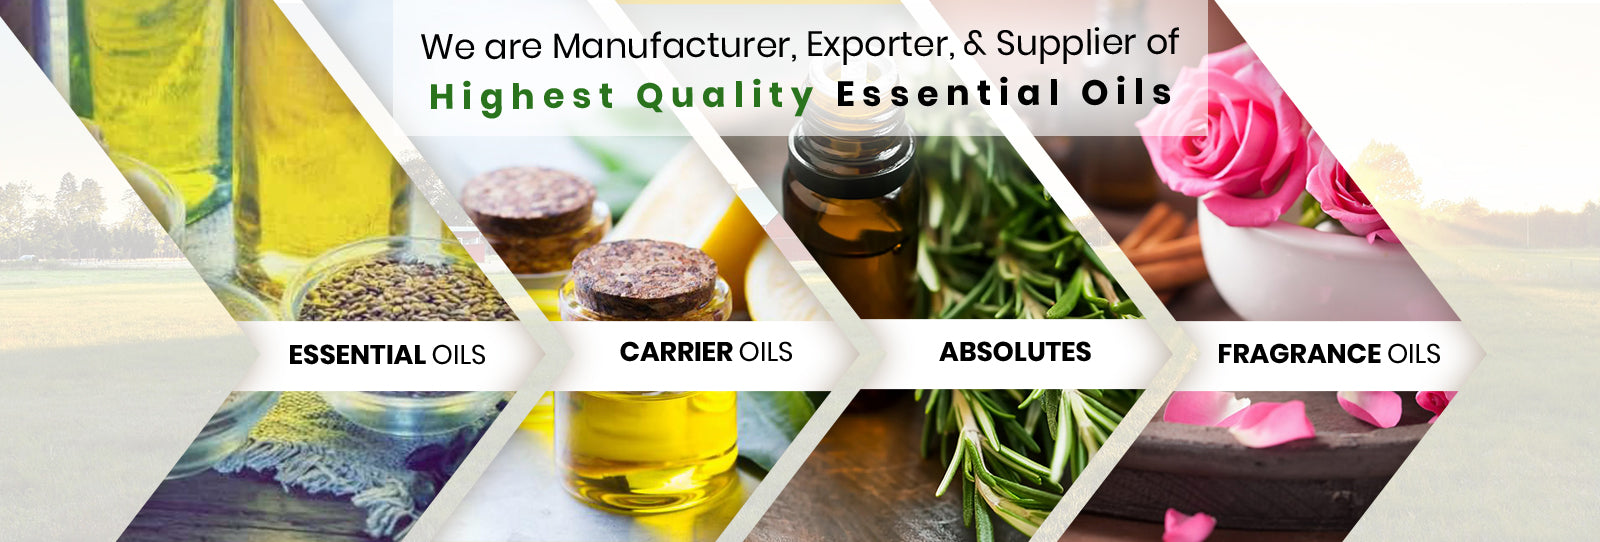 Essential Oils Vs Fragrance Oil Concentrates – Shiva Exports India